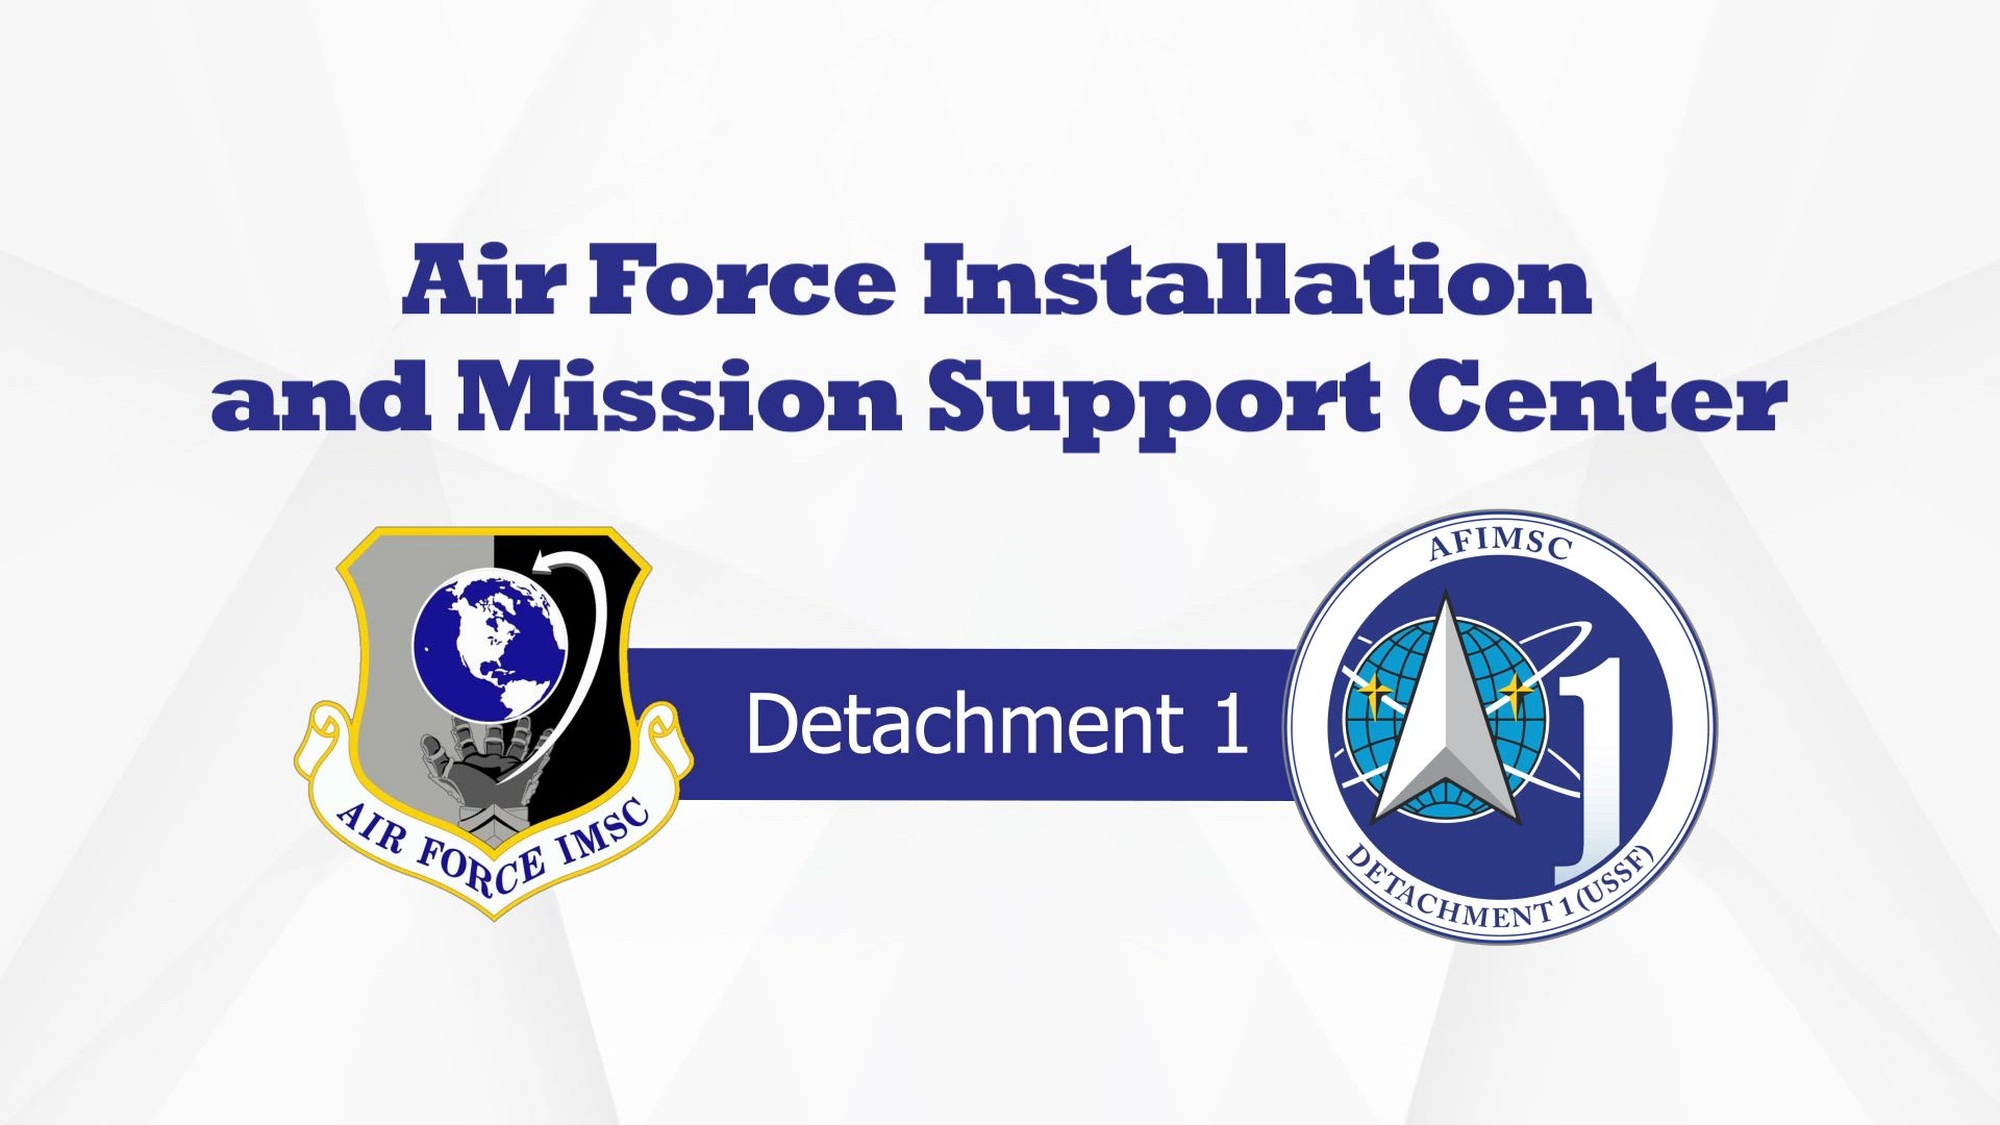 Air Force Installation and Mission Support Center Detachment 1 plays a crucial role in seeking the most effective and efficient means in which to support unique and diverse space missions.